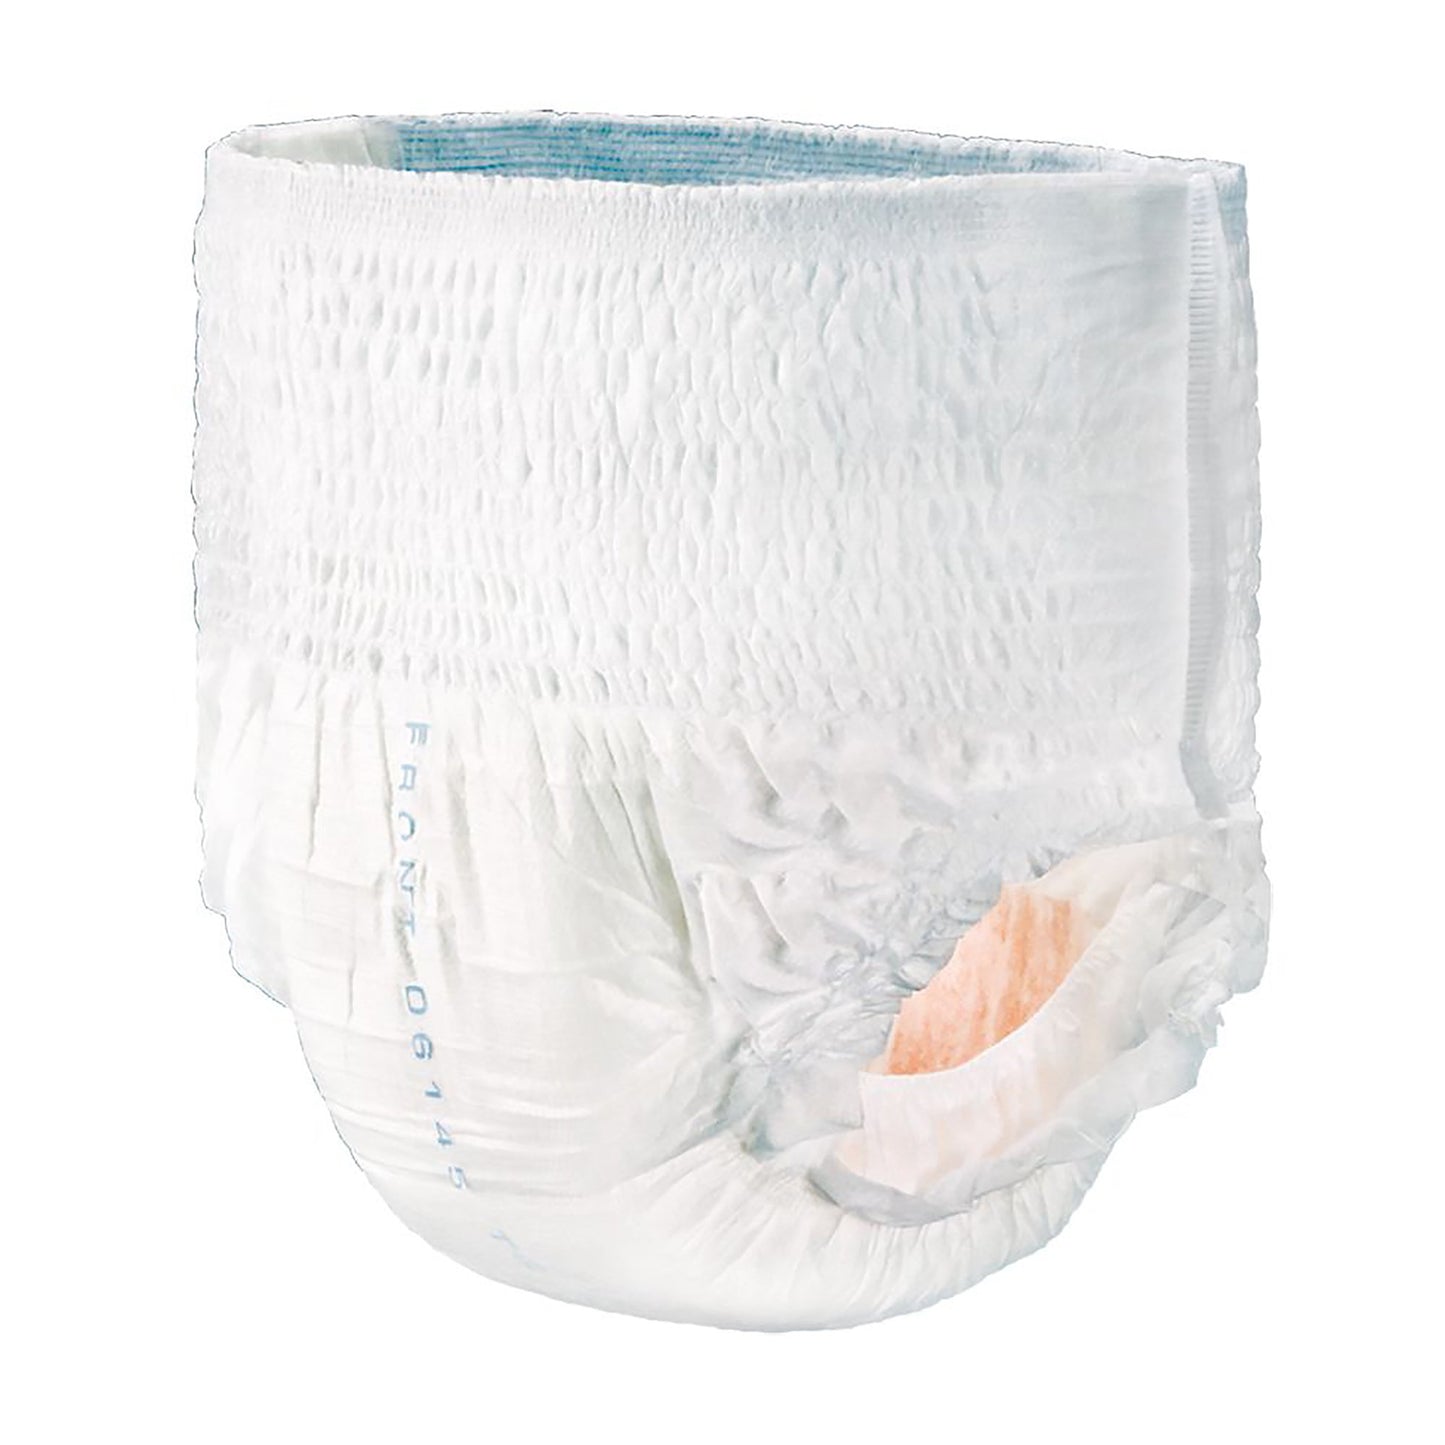 Tranquility® Premium OverNight™ Maximum Protection Absorbent Underwear, Extra Small, 22 ct